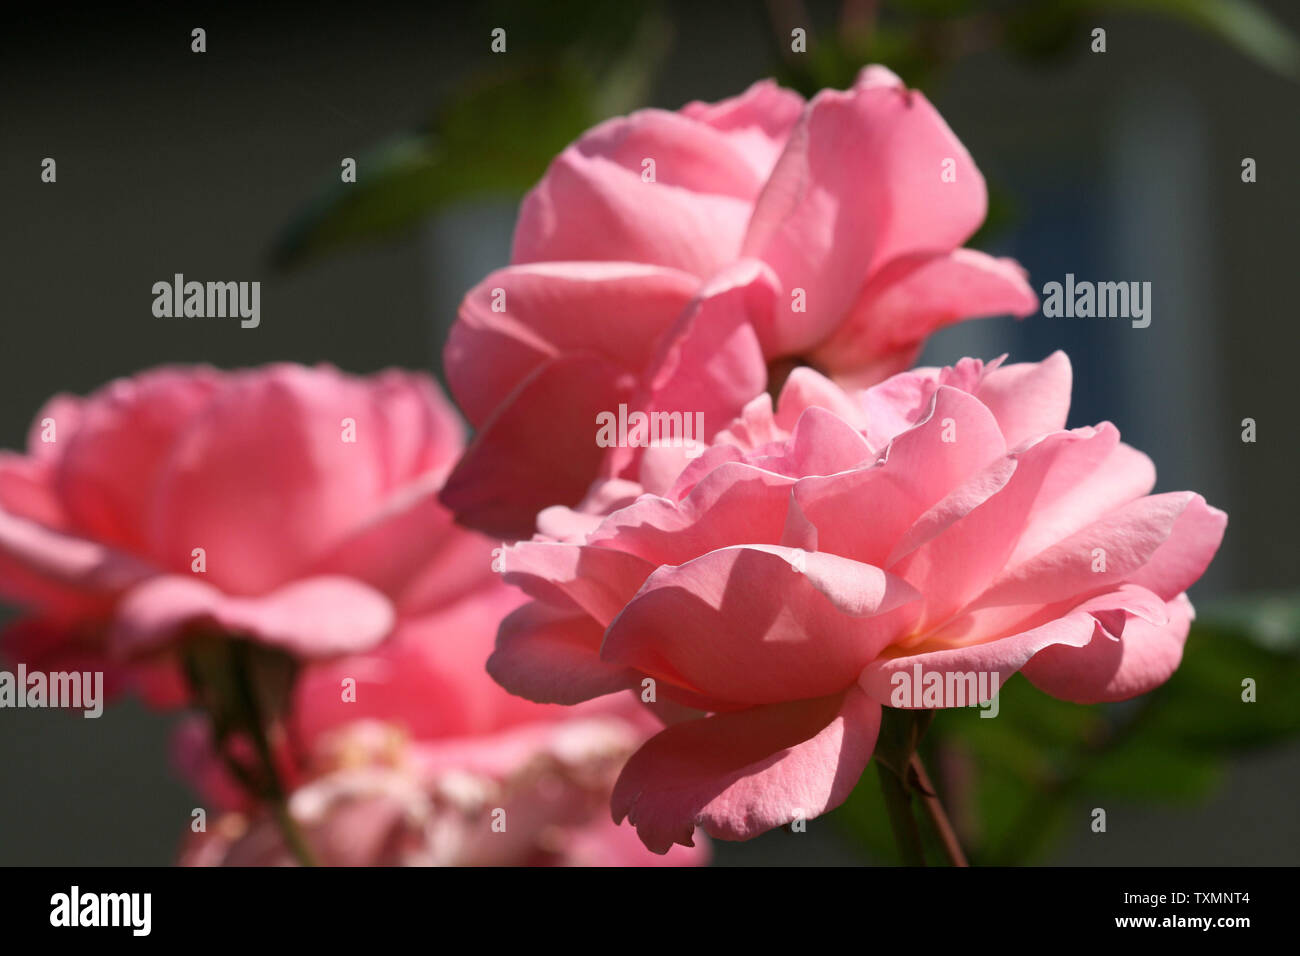 Beautiful pink roses growing in the garden Stock Photo